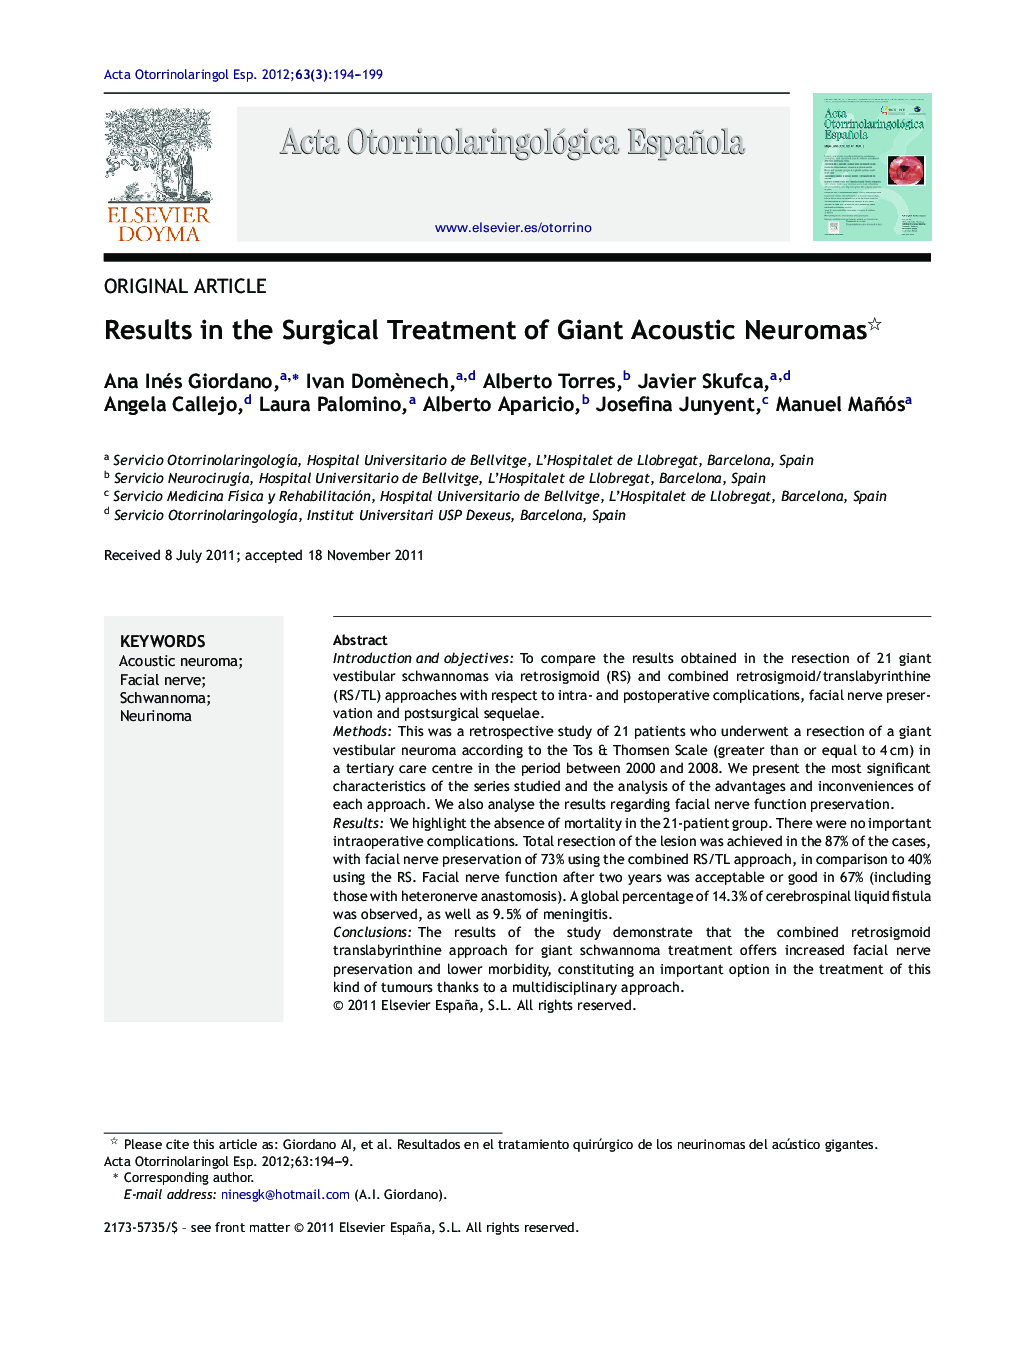 Results in the Surgical Treatment of Giant Acoustic Neuromas 